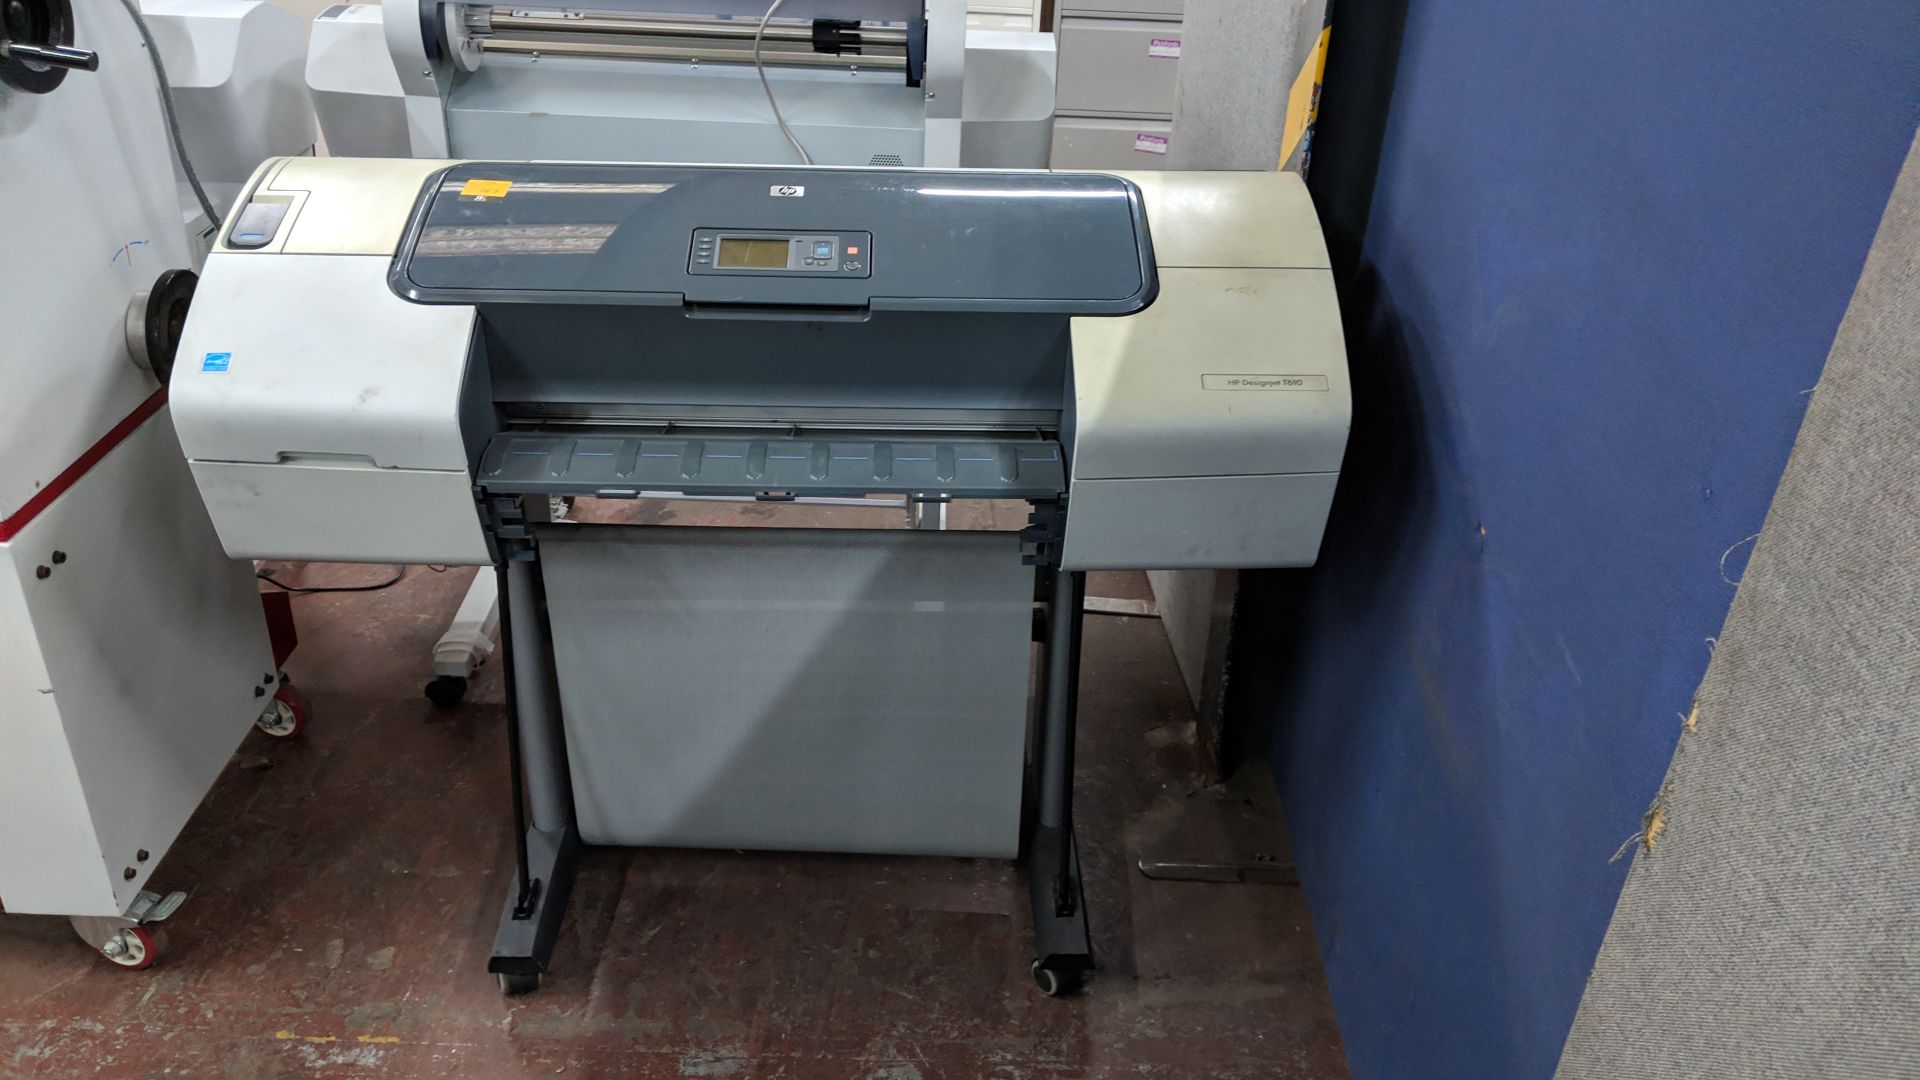 HP DesignJet T610 24" wide format printer, serial no. MY85T3C06N, factory model Q6712A IMPORTANT: